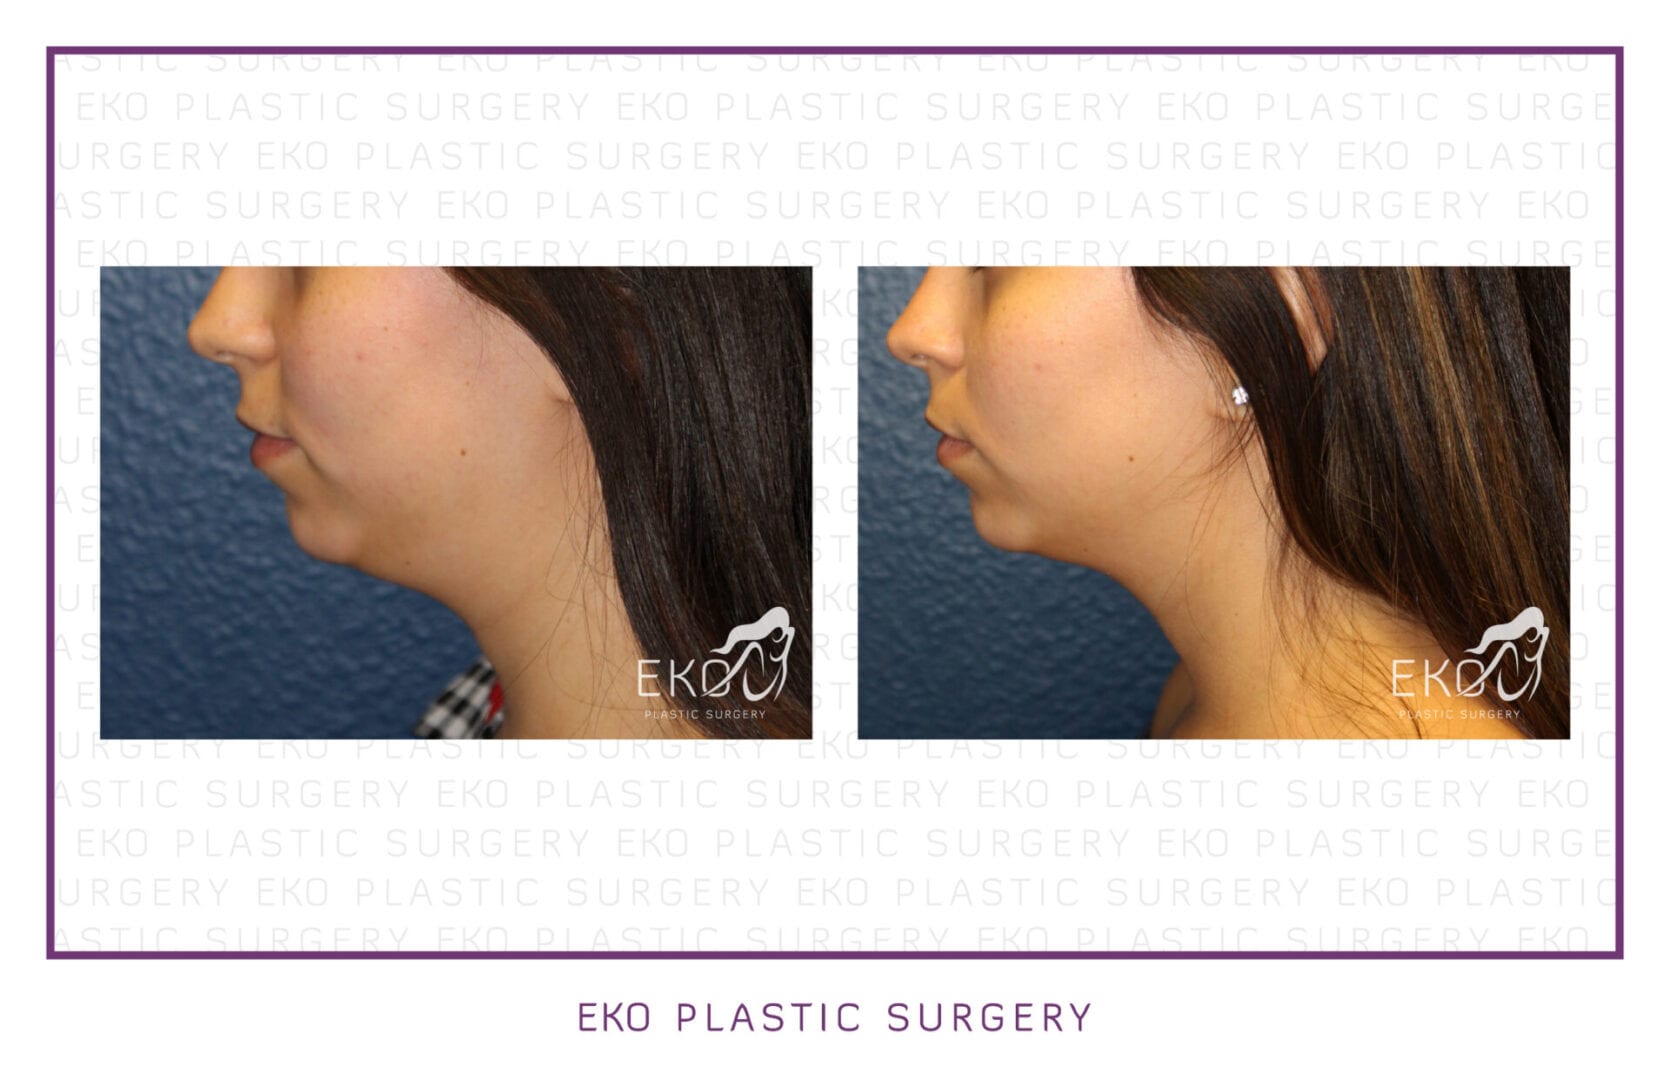 Kybella® Before and After Photo by Dr. Eko of Eko Plastic Surgery in Palm Desert, CA